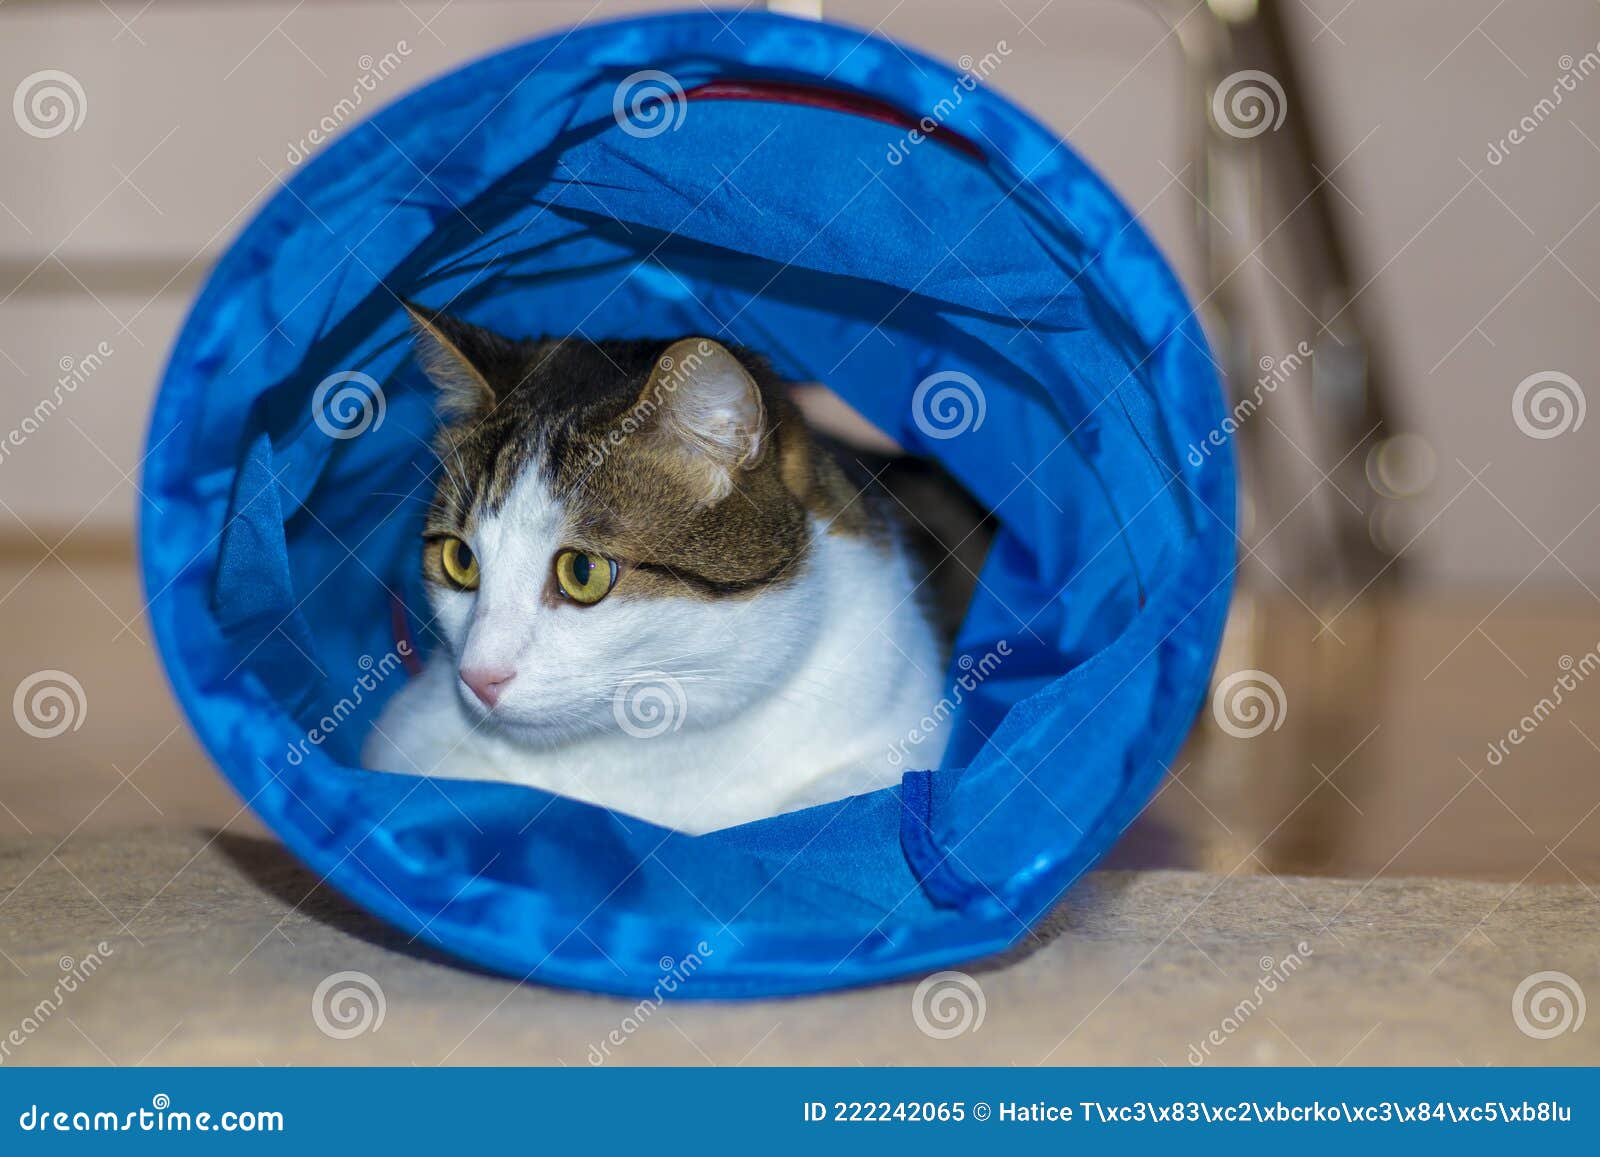 109 Cat Play Tunnel Photos Free Royalty Free Stock Photos From Dreamstime